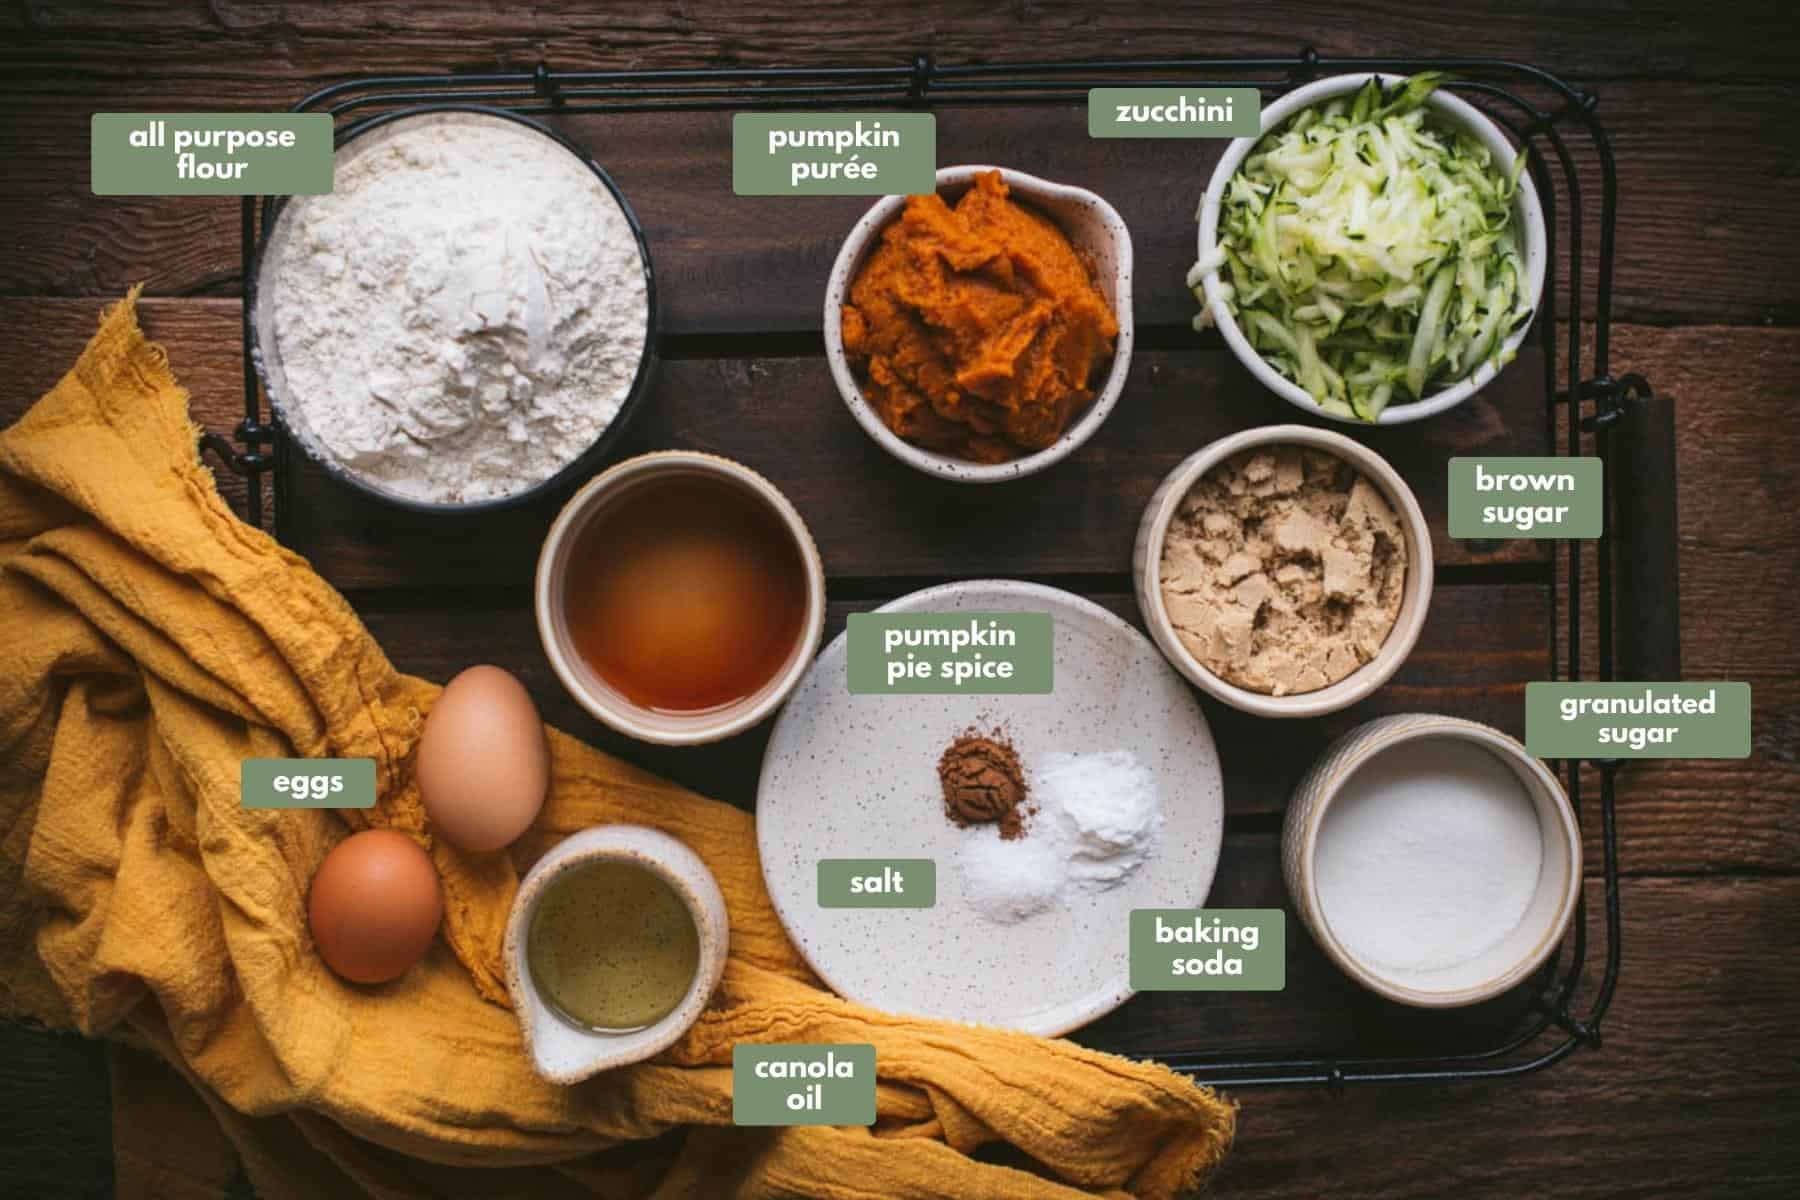 Labeled ingredients in an overhead photo next to a yellow linen napkin and placed on a wooden board.  Flour, pumpkin puree, grated zucchini, brown sugar, white sugar, vanilla, spiced, baking soda, oil, and eggs.